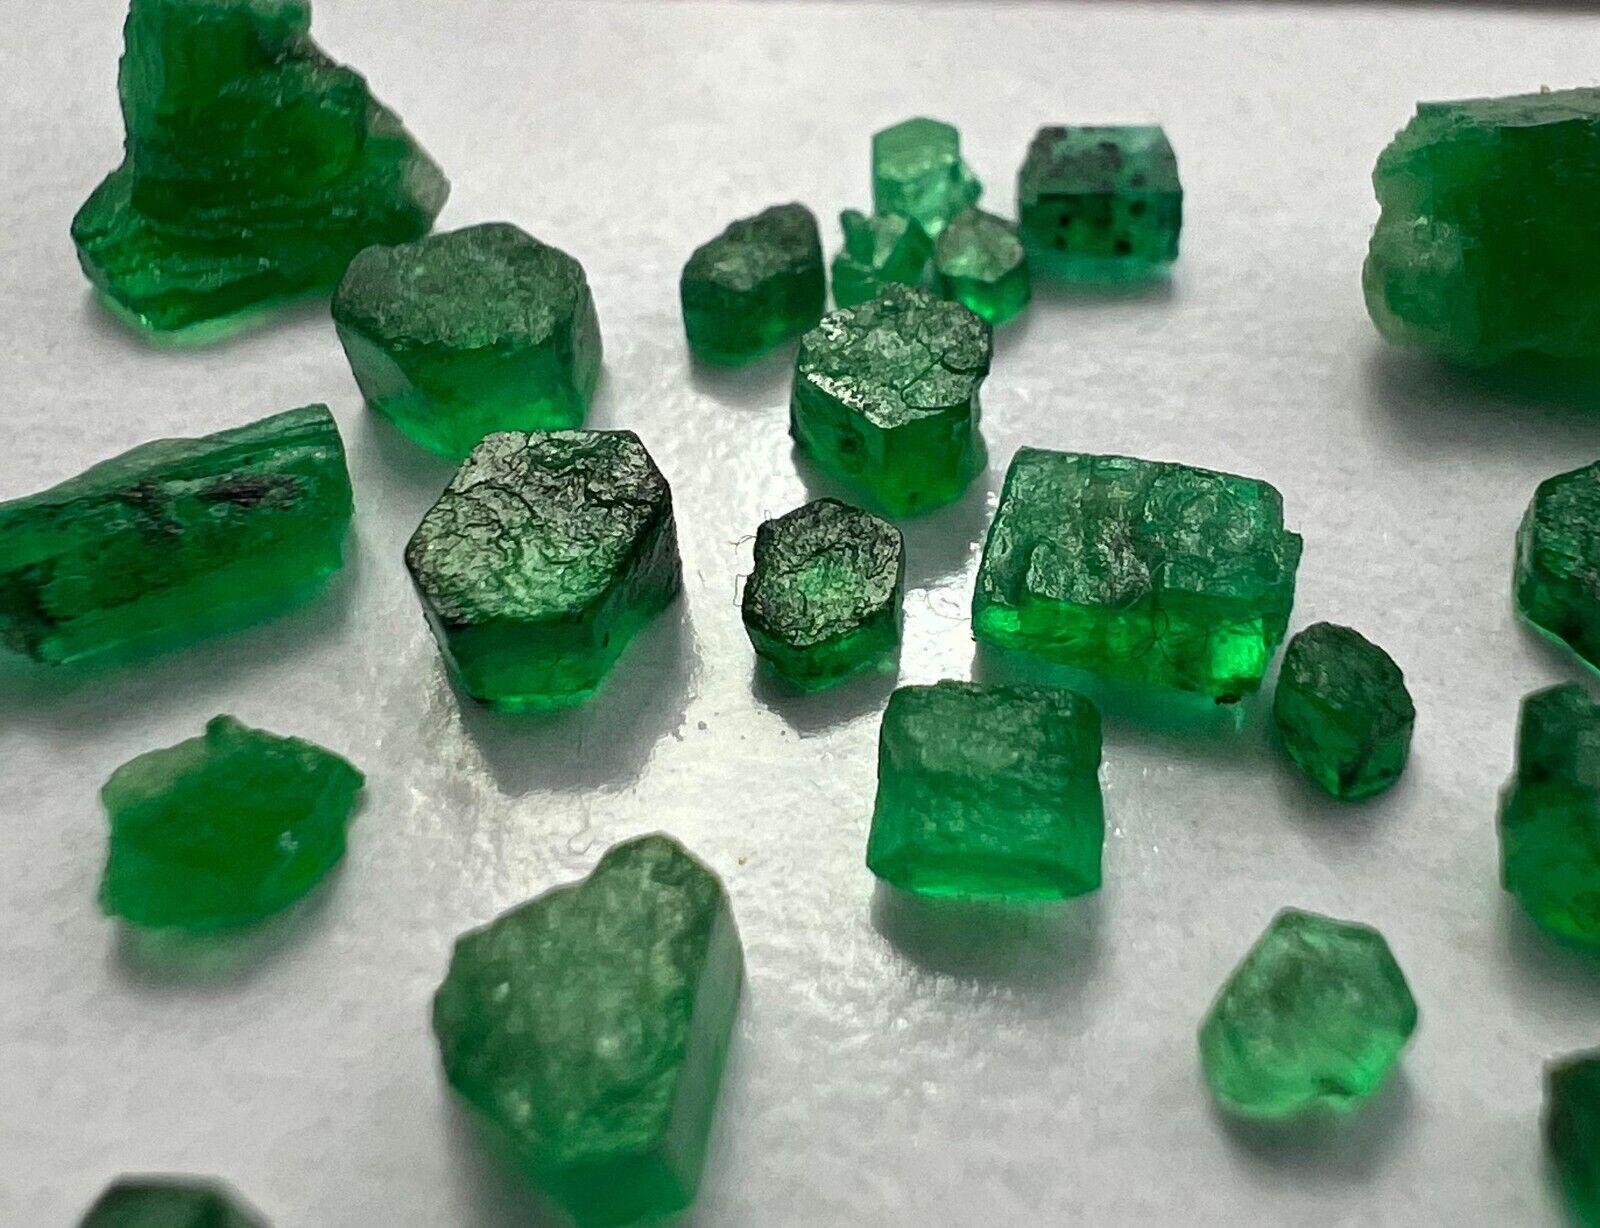 10+ CT. High quality Swat Emerald crystals lot @pakistan.